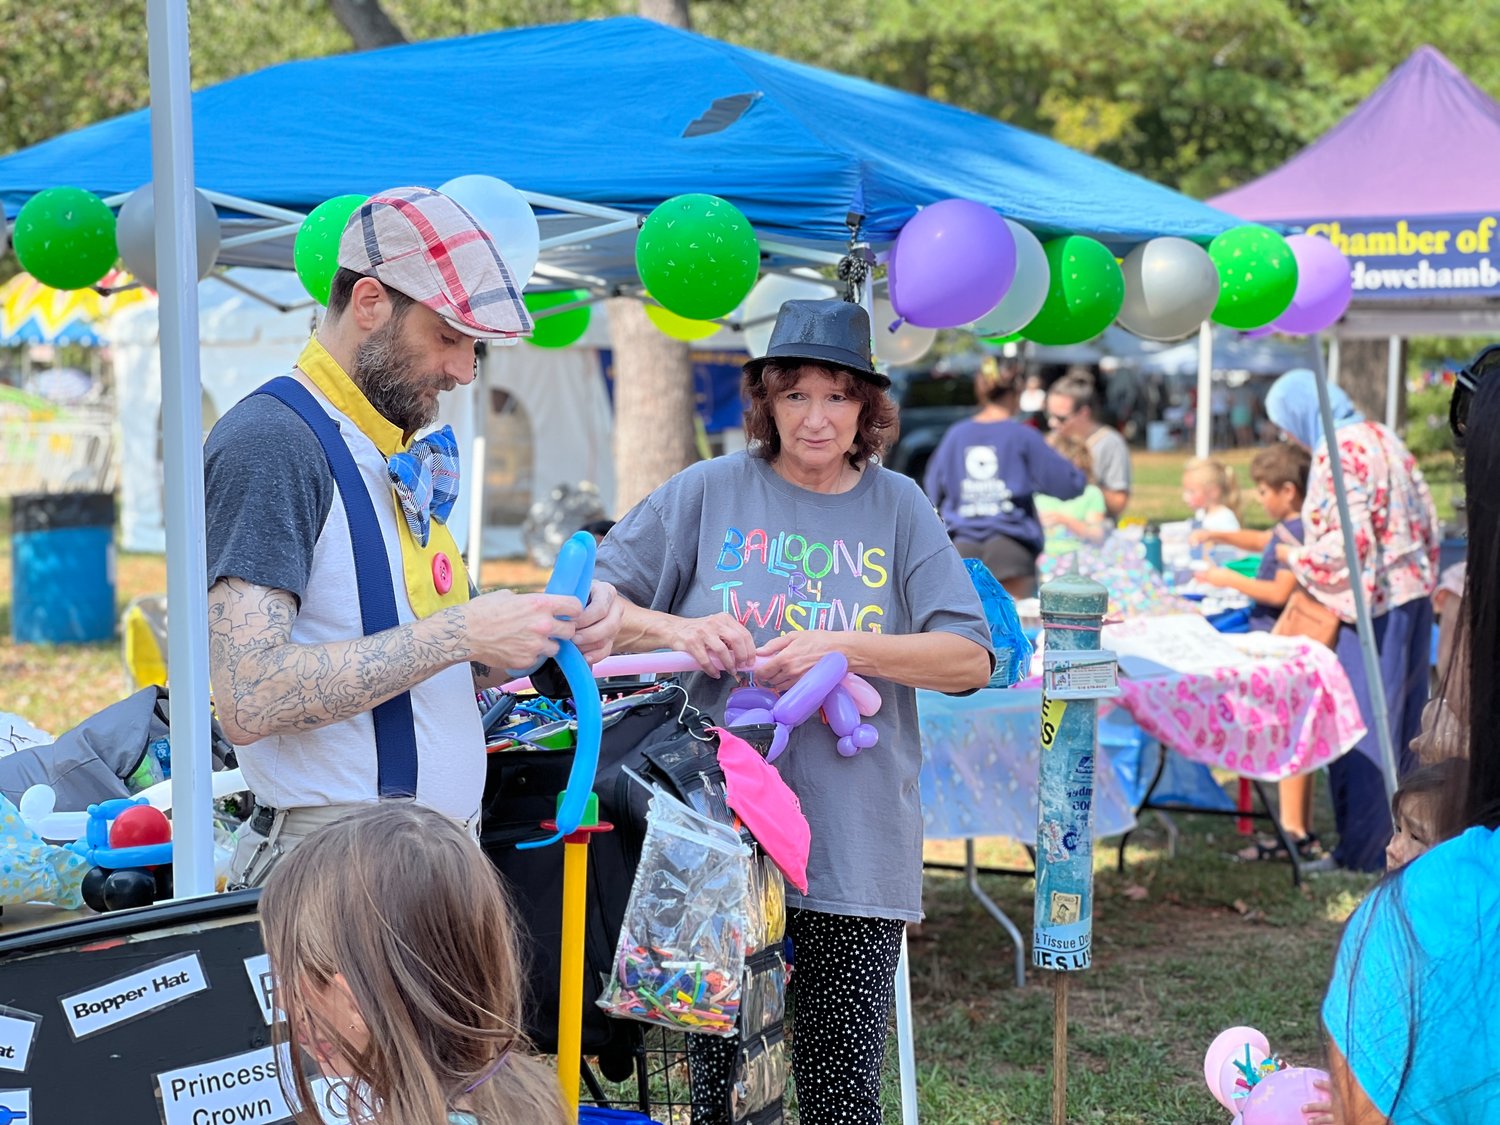 On Saturday, there were balloonists ready to make some kids very happy with a balloon animal.